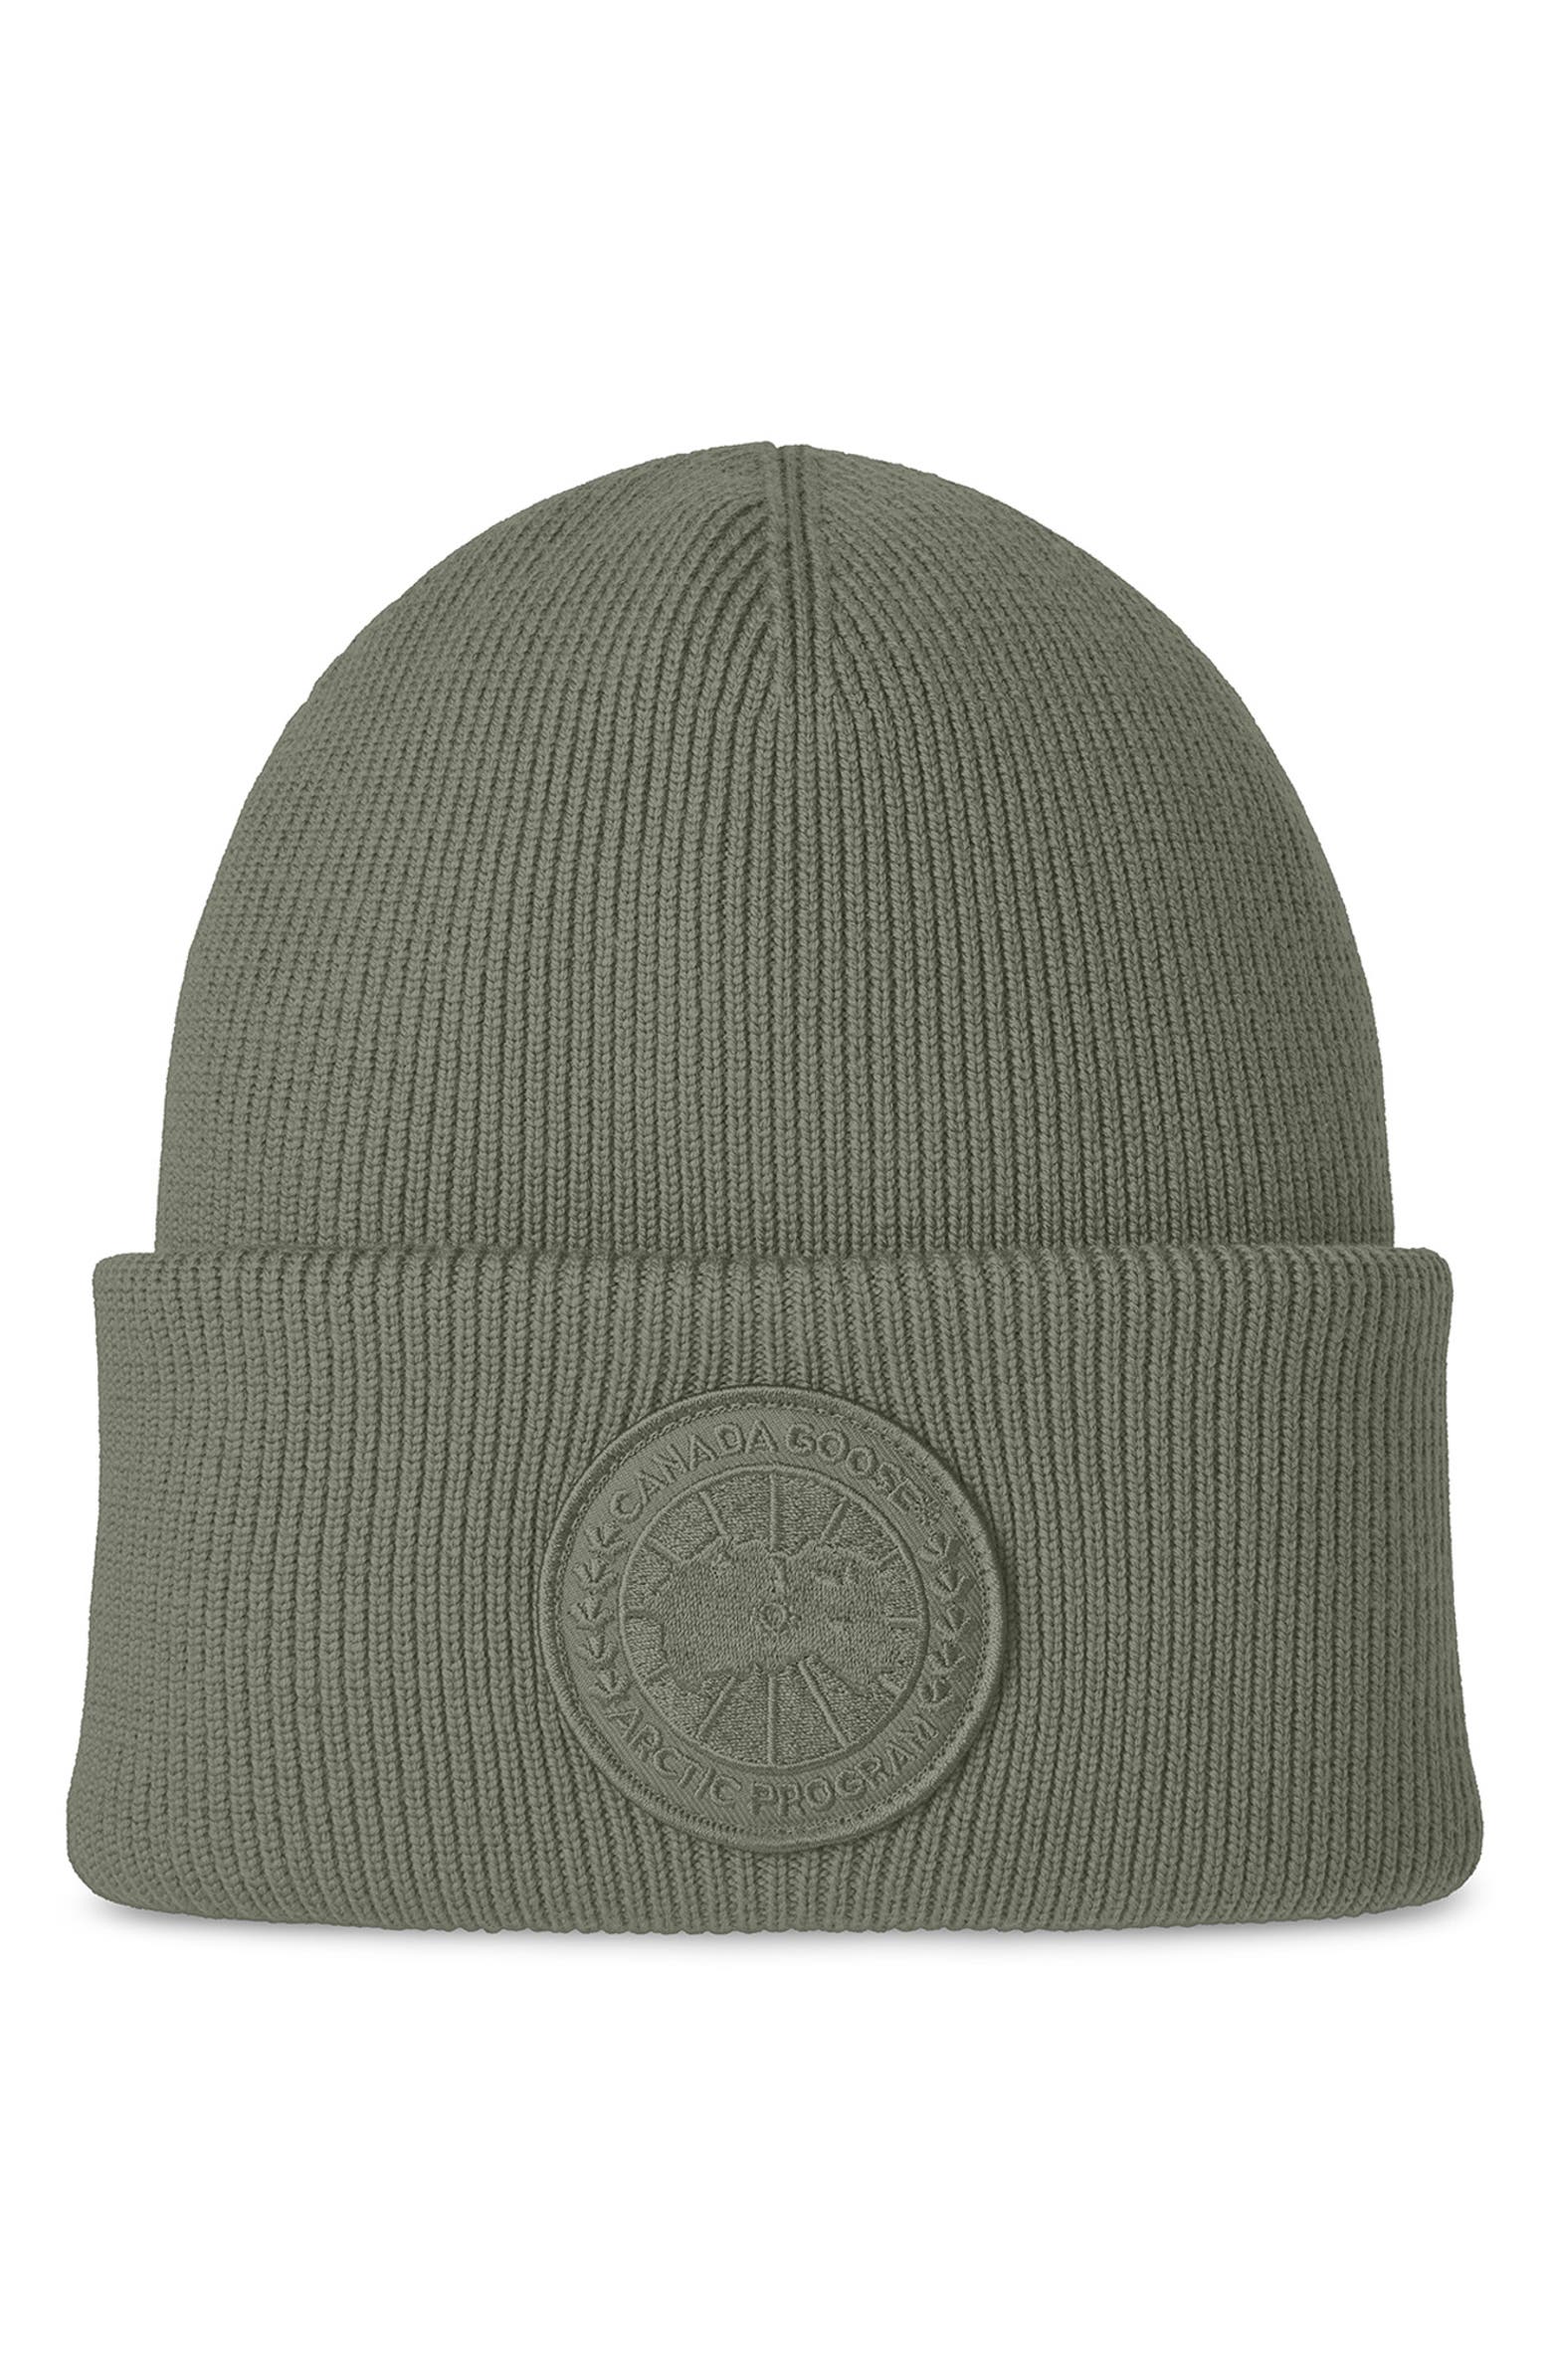 Olive green Canada Goose beanie